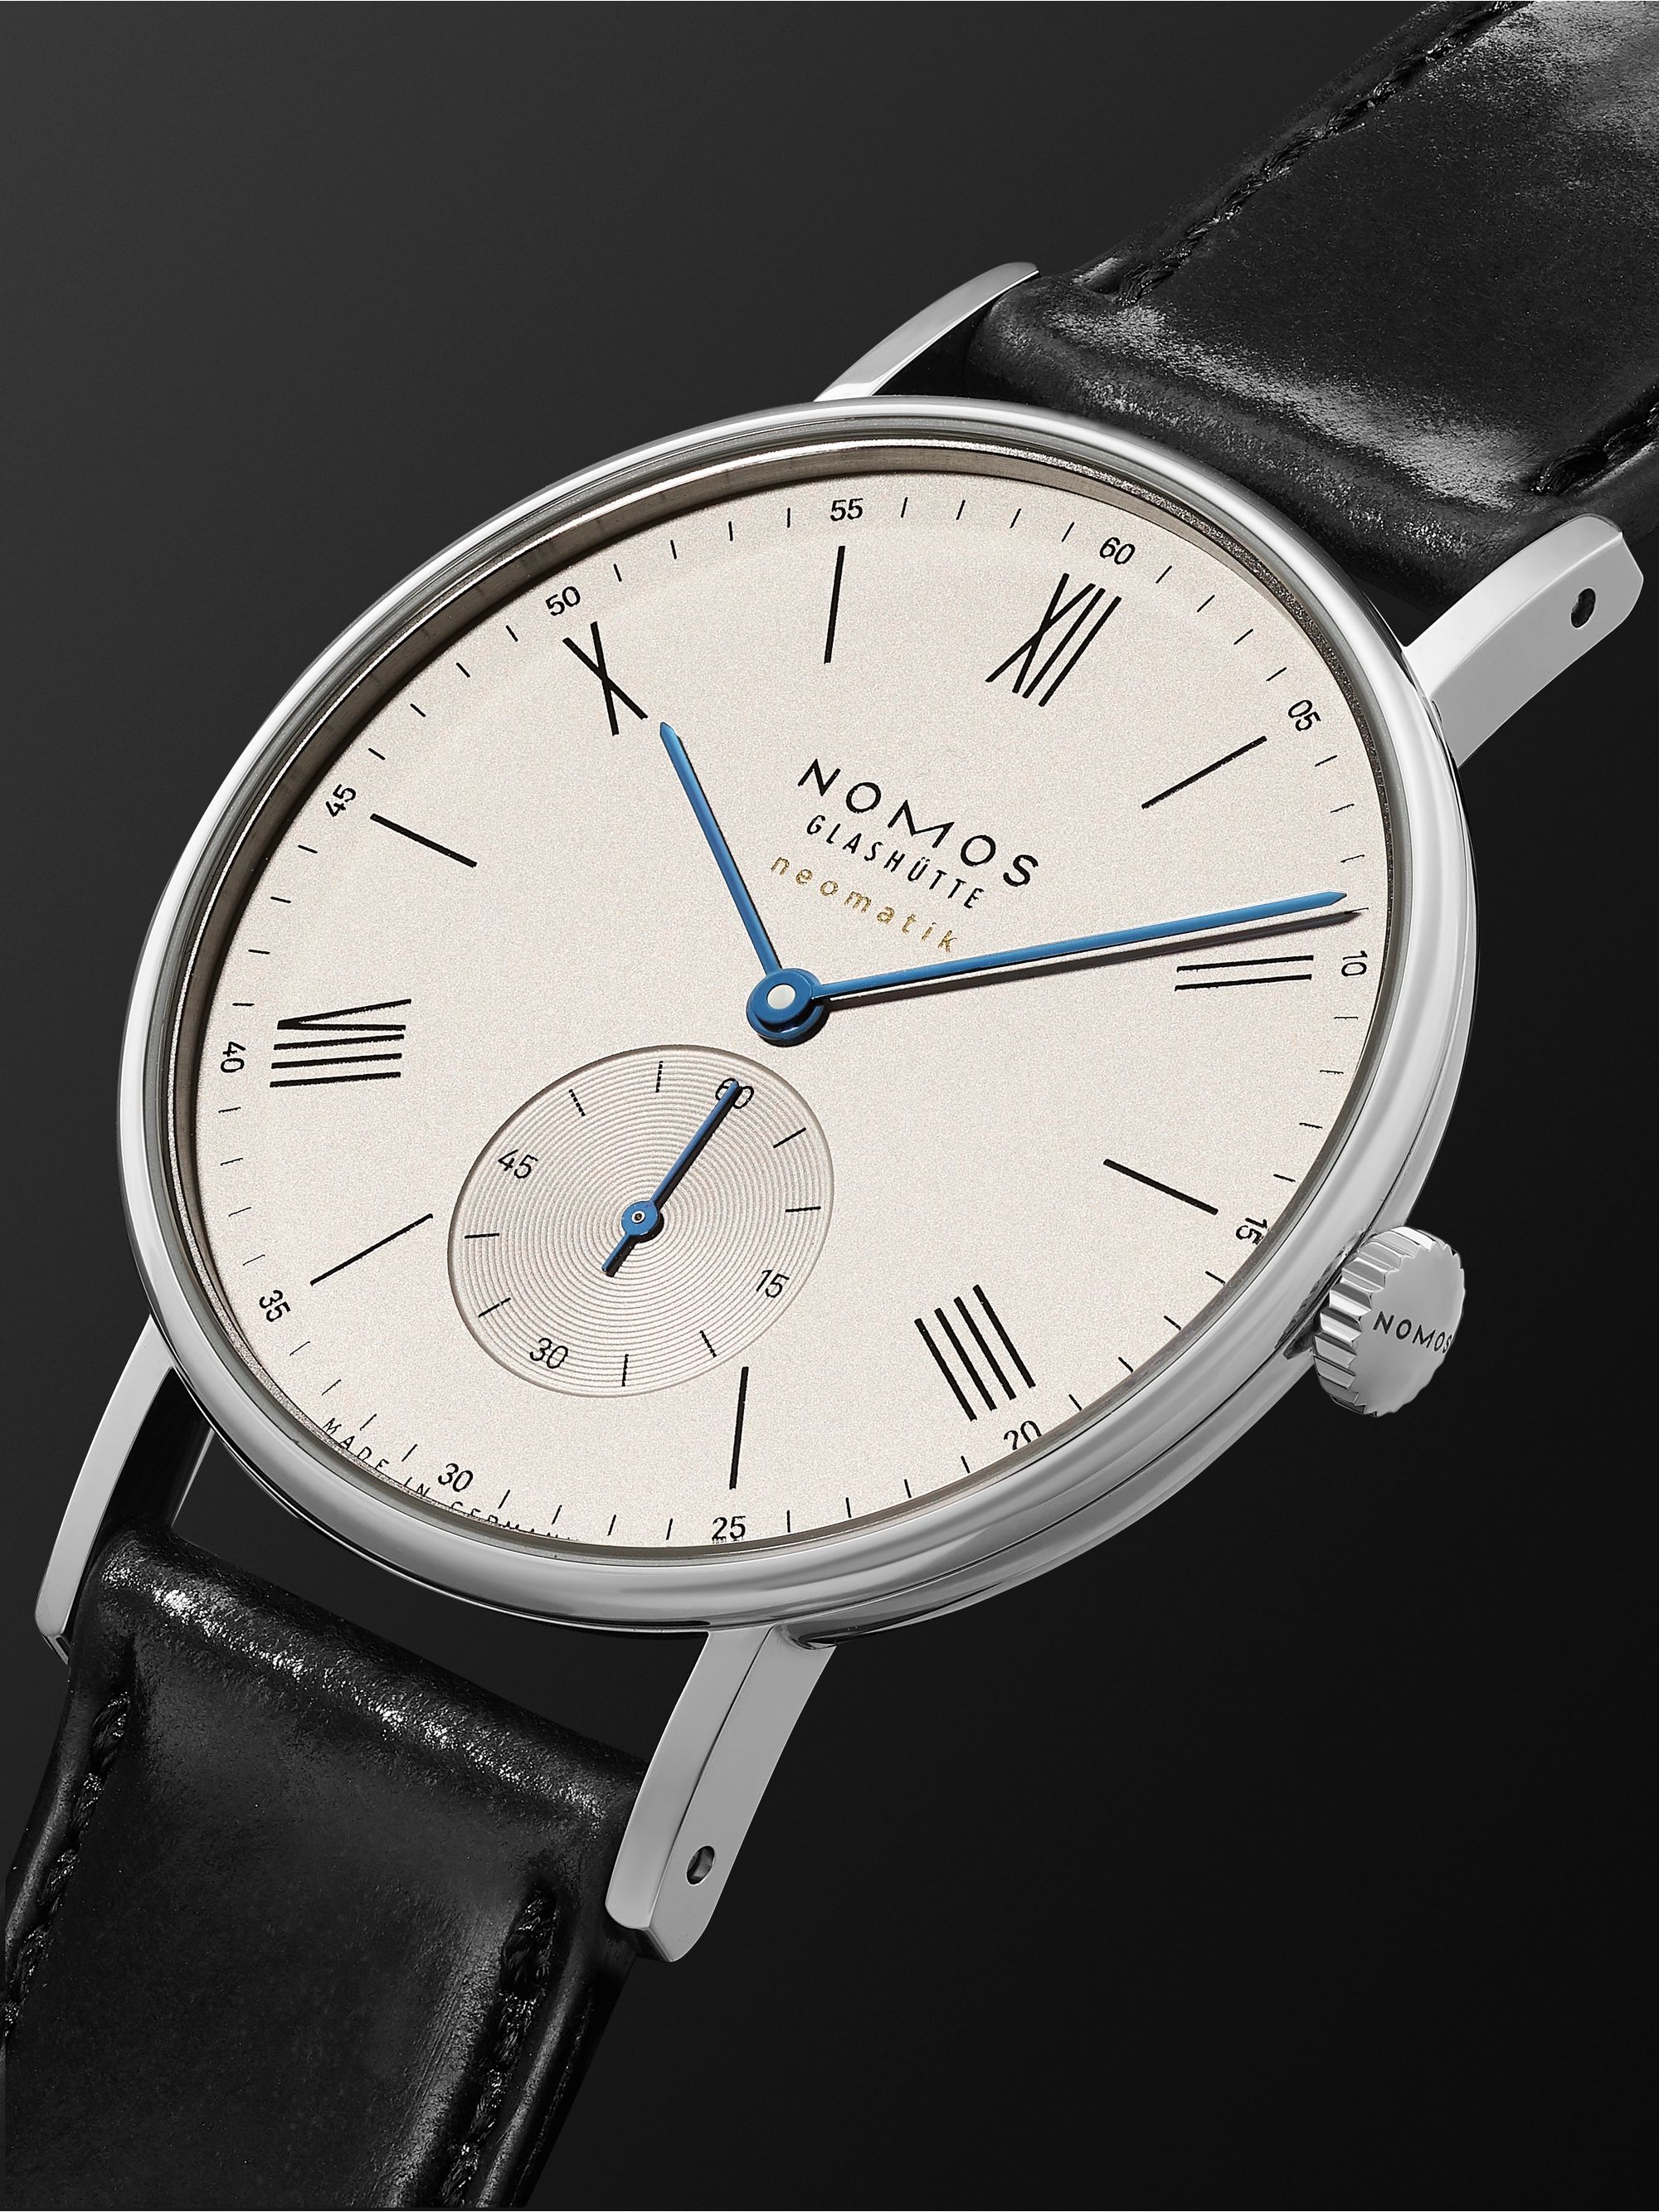 NOMOS GLASHÜTTE Ludwig Neomatik 39 Automatic 38.5mm Stainless Steel and Leather Watch, Ref. No. 250